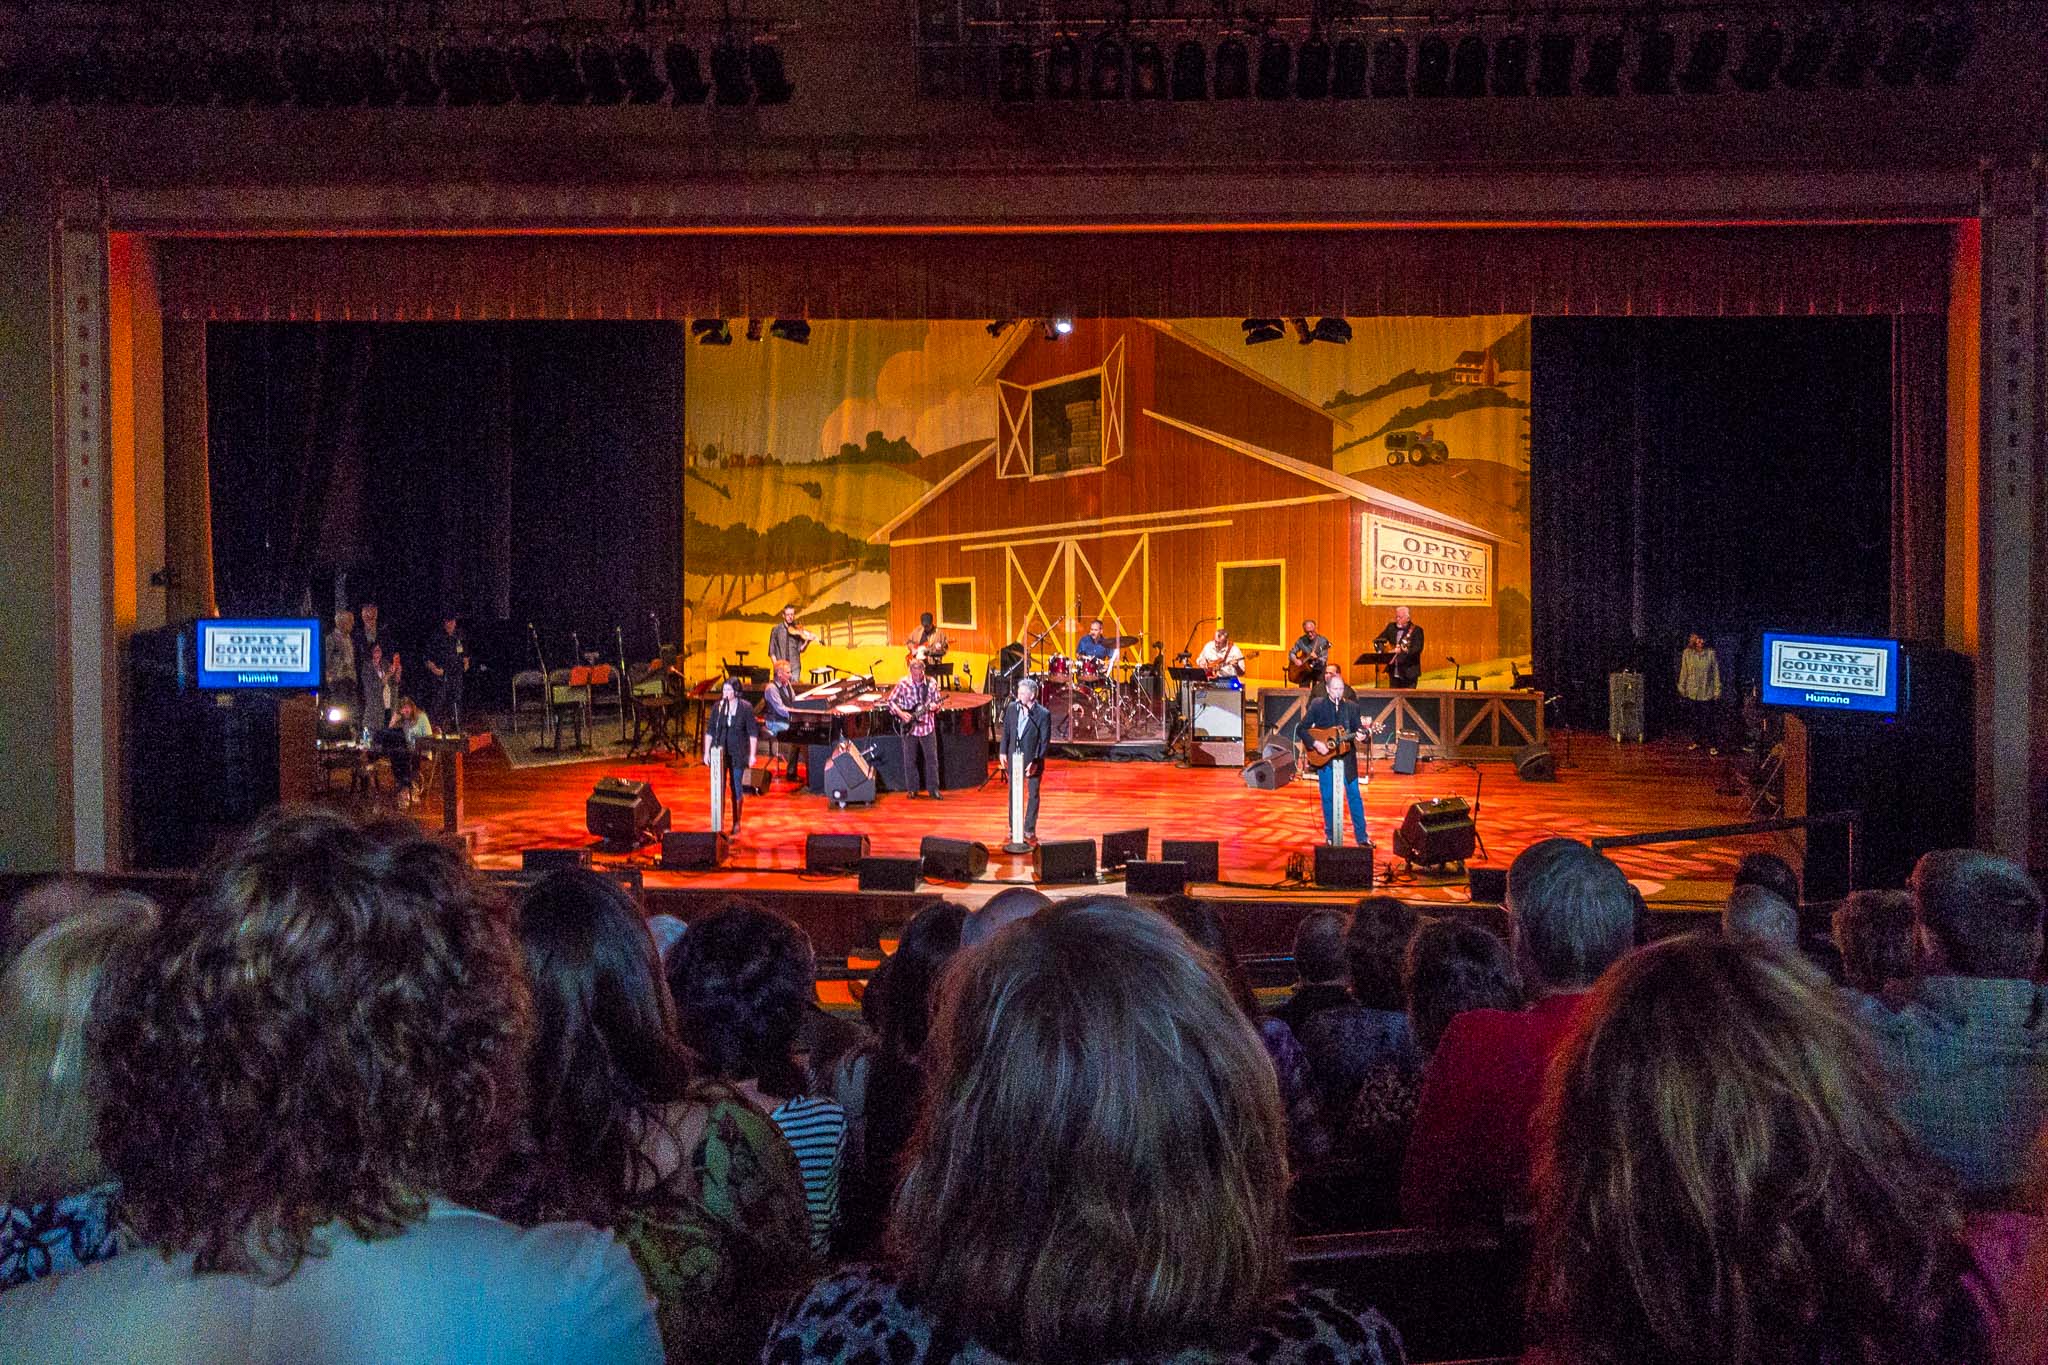 The Grand Ole Opry at the Ryman Auditorium